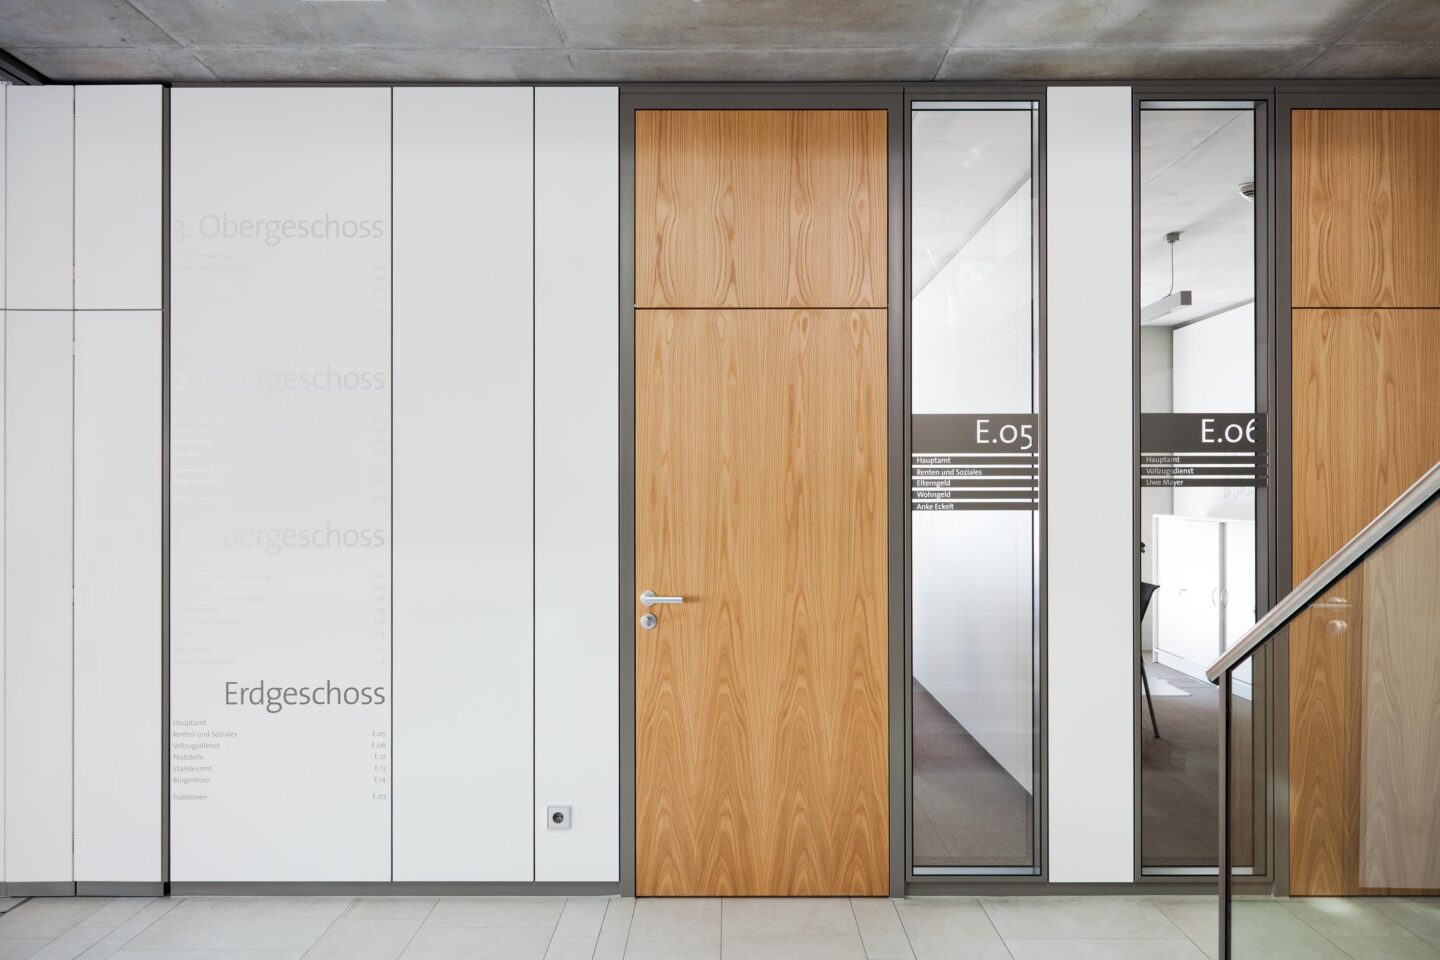 Town Hall Leingarten │ corridor and office partition │ fecotür wood